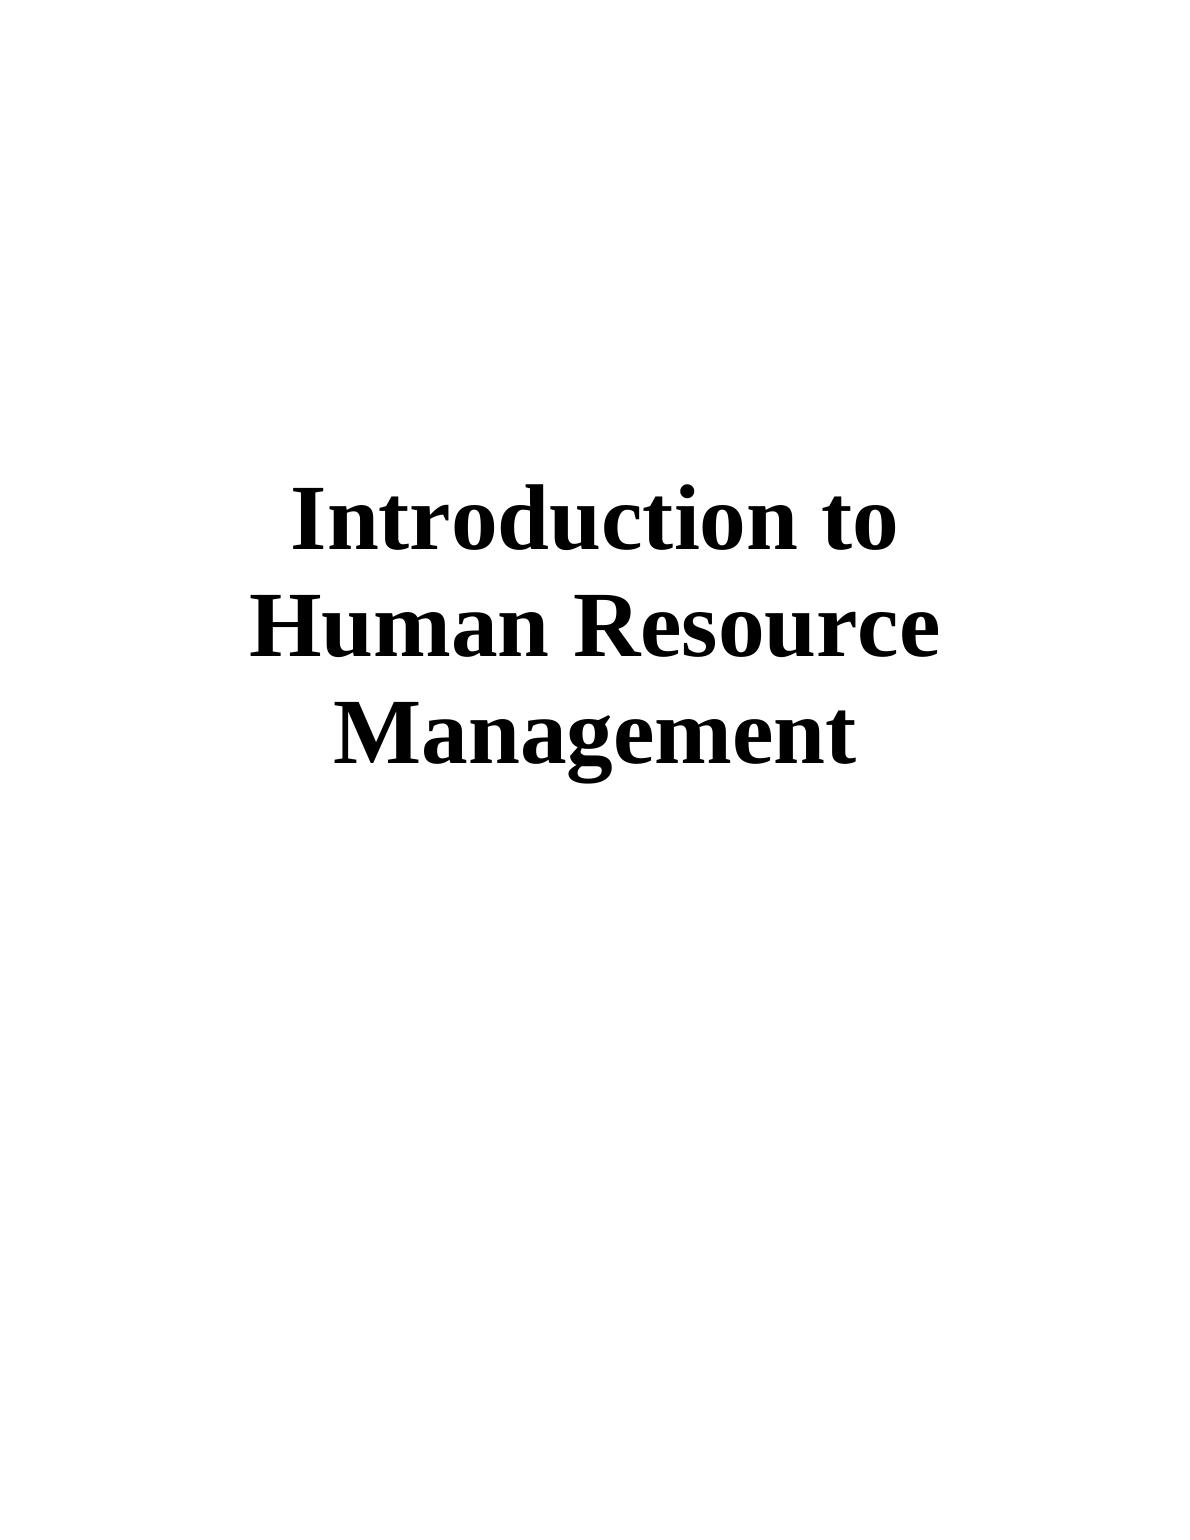 Introduction to Human Resource Management - Assignment Sample_1